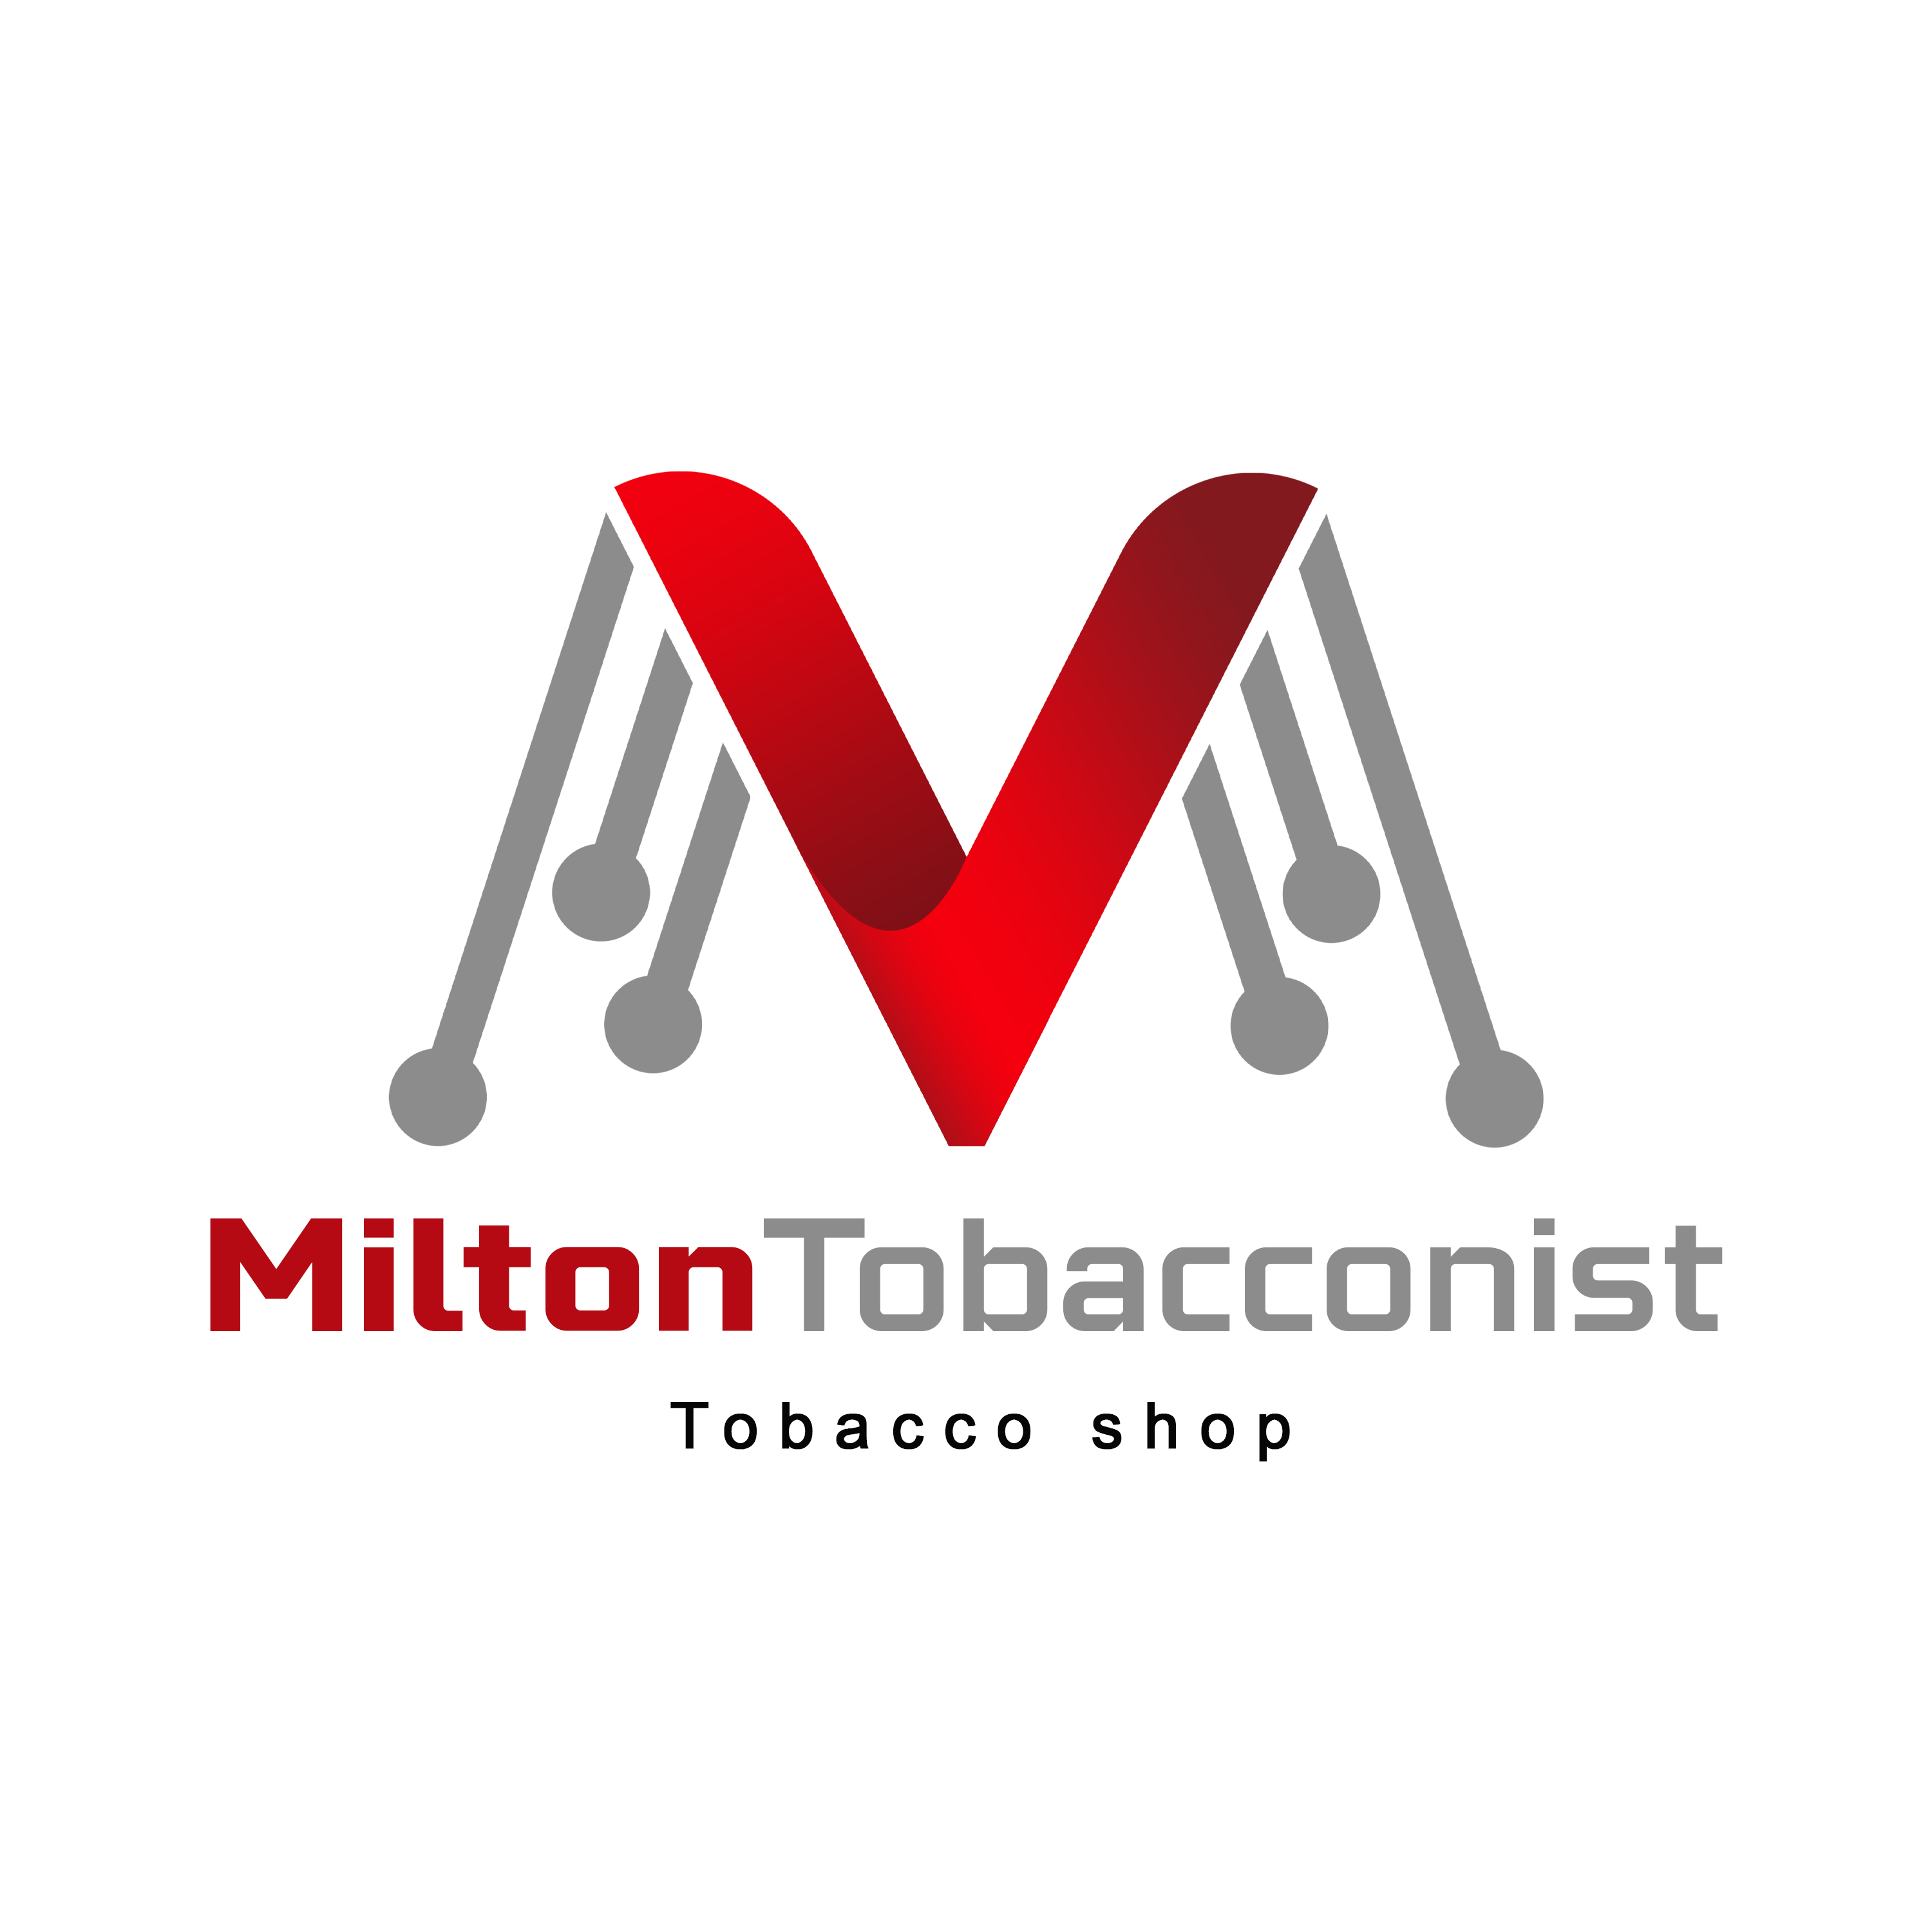 Milton Tobacconist (snacks & gifts)'